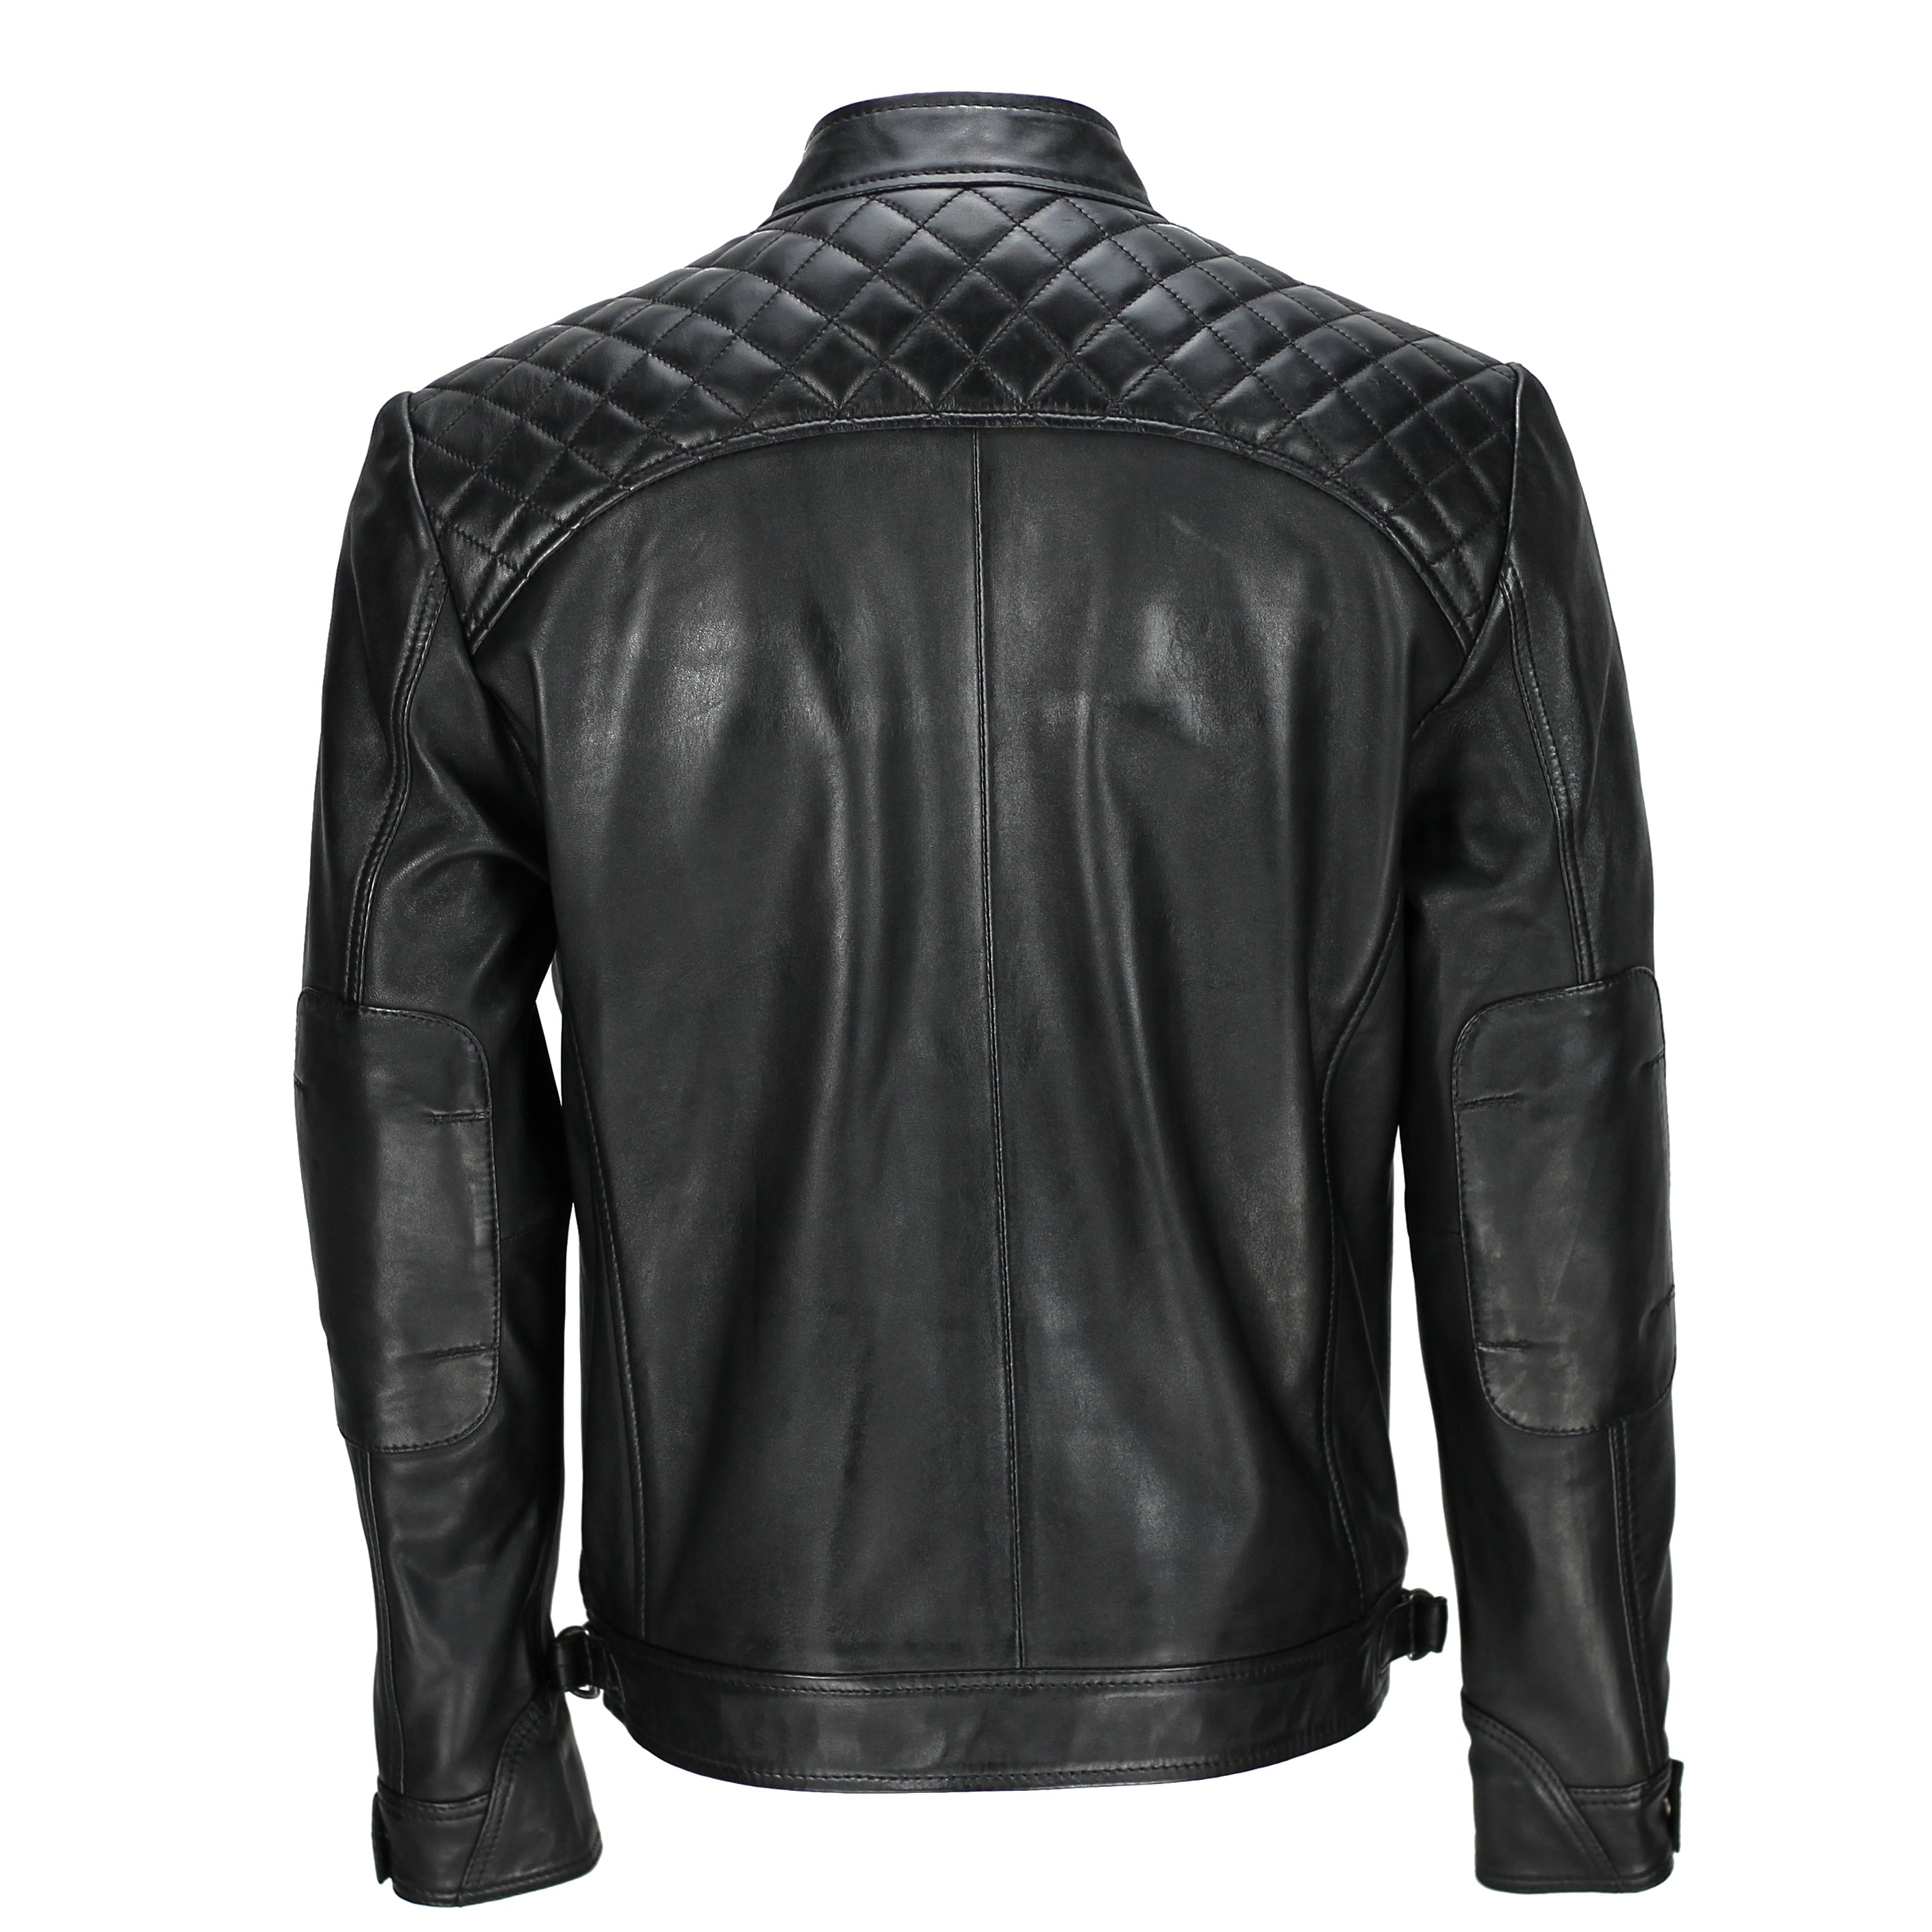 Mens New Real Soft Leather Black Vintage Zipped Smart Casual Biker Style Jacket